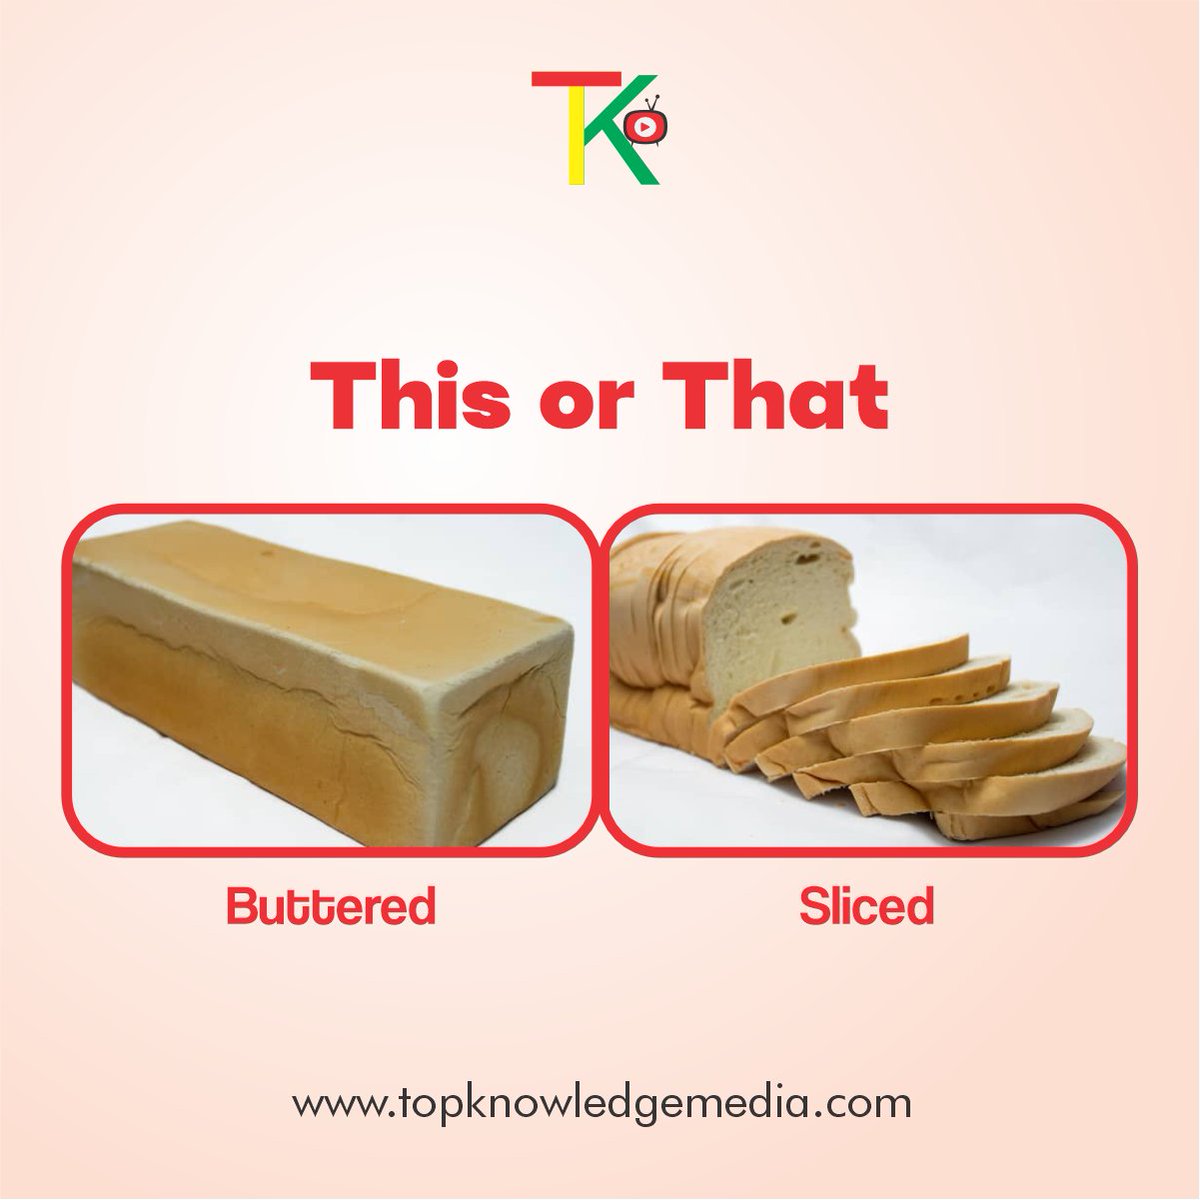 Choose One👇

Buttered or Sliced?
#ButteredOrSliced #FoodDebate #TastyChoices #FoodieLife #YumYum#DeliciousDilemma #FoodieCommunity #FoodieQuestion #TasteTest #FoodieDiscussion